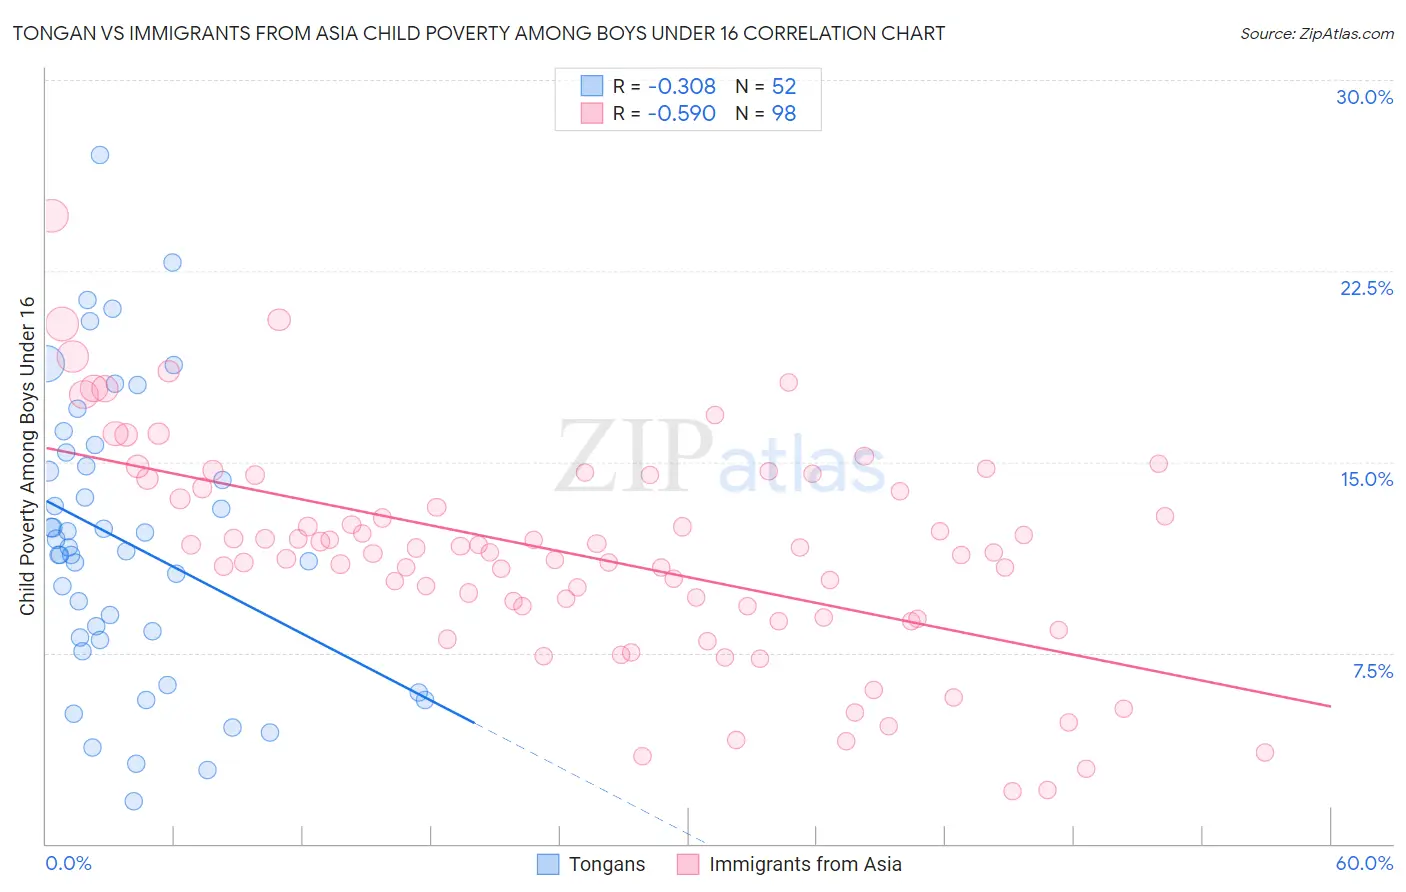 Tongan vs Immigrants from Asia Child Poverty Among Boys Under 16